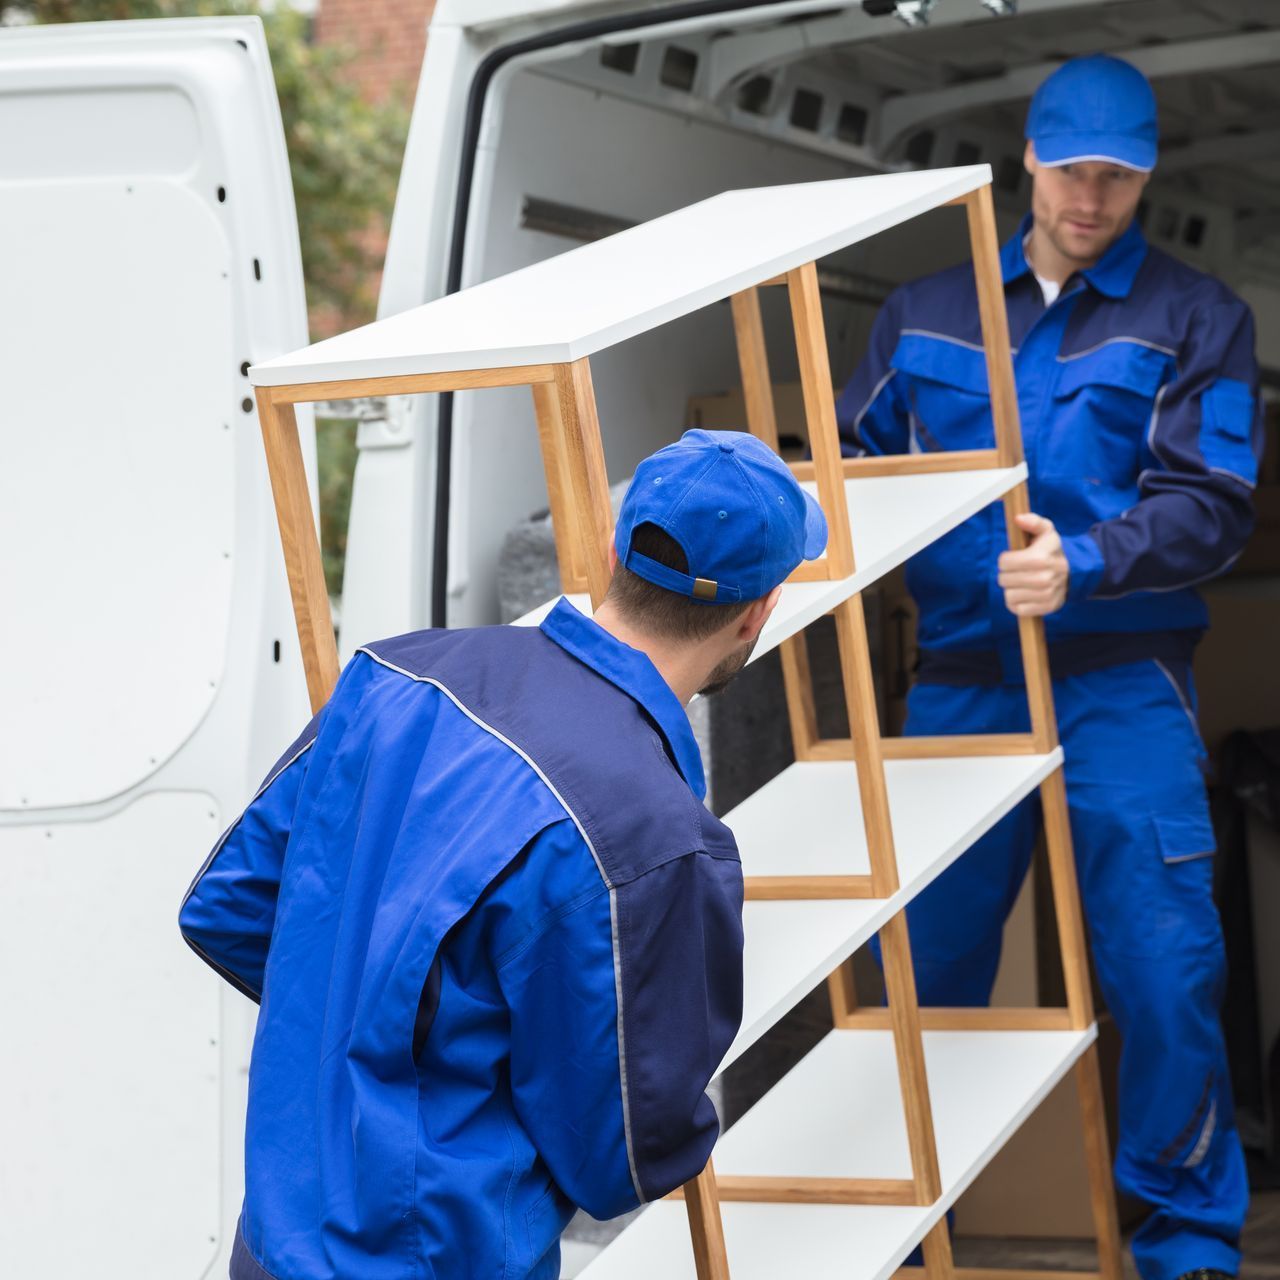 two men in blue uniforms are loading shelves into a van